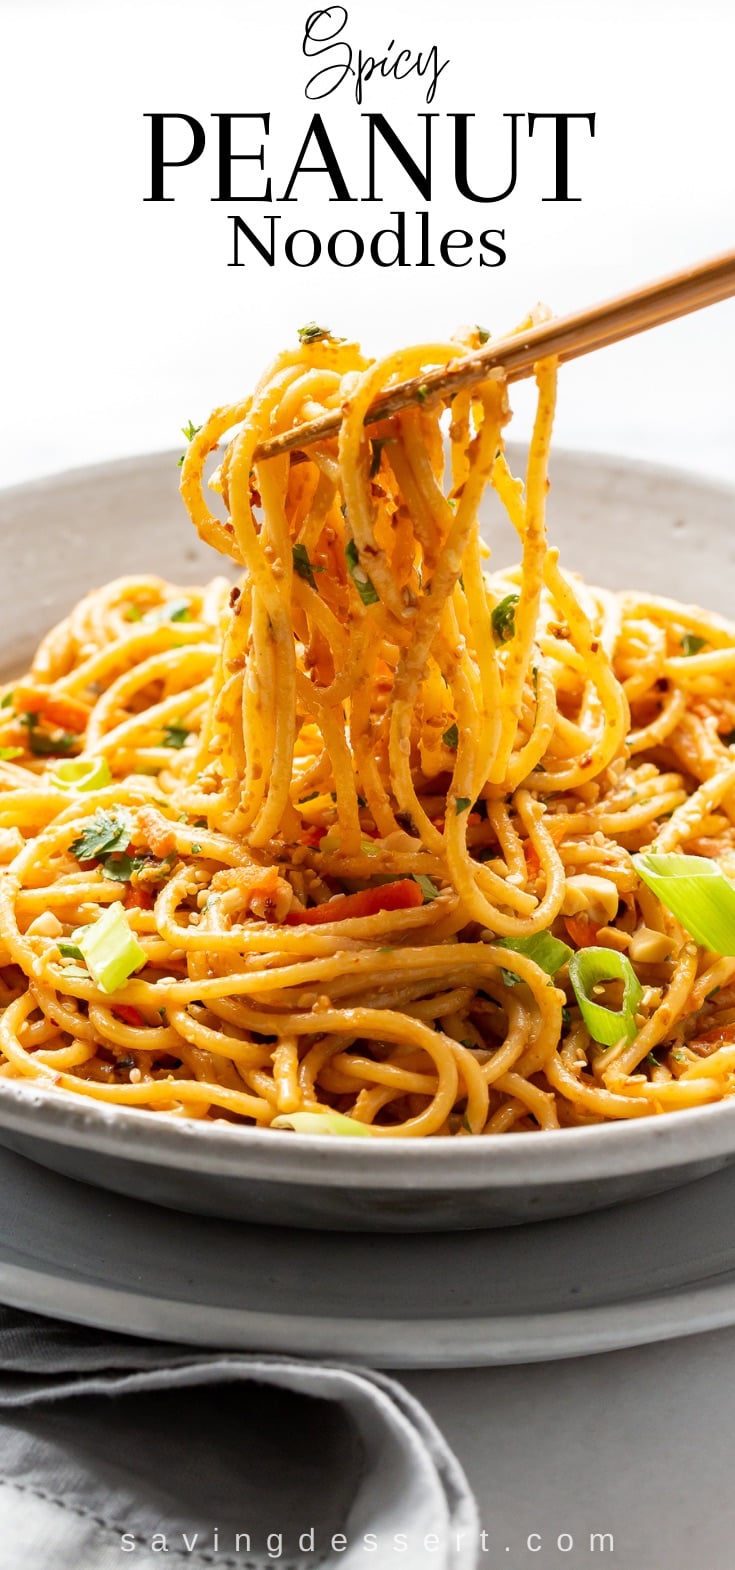 A bowl of spaghetti noodles coated in a spicy peanut sauce